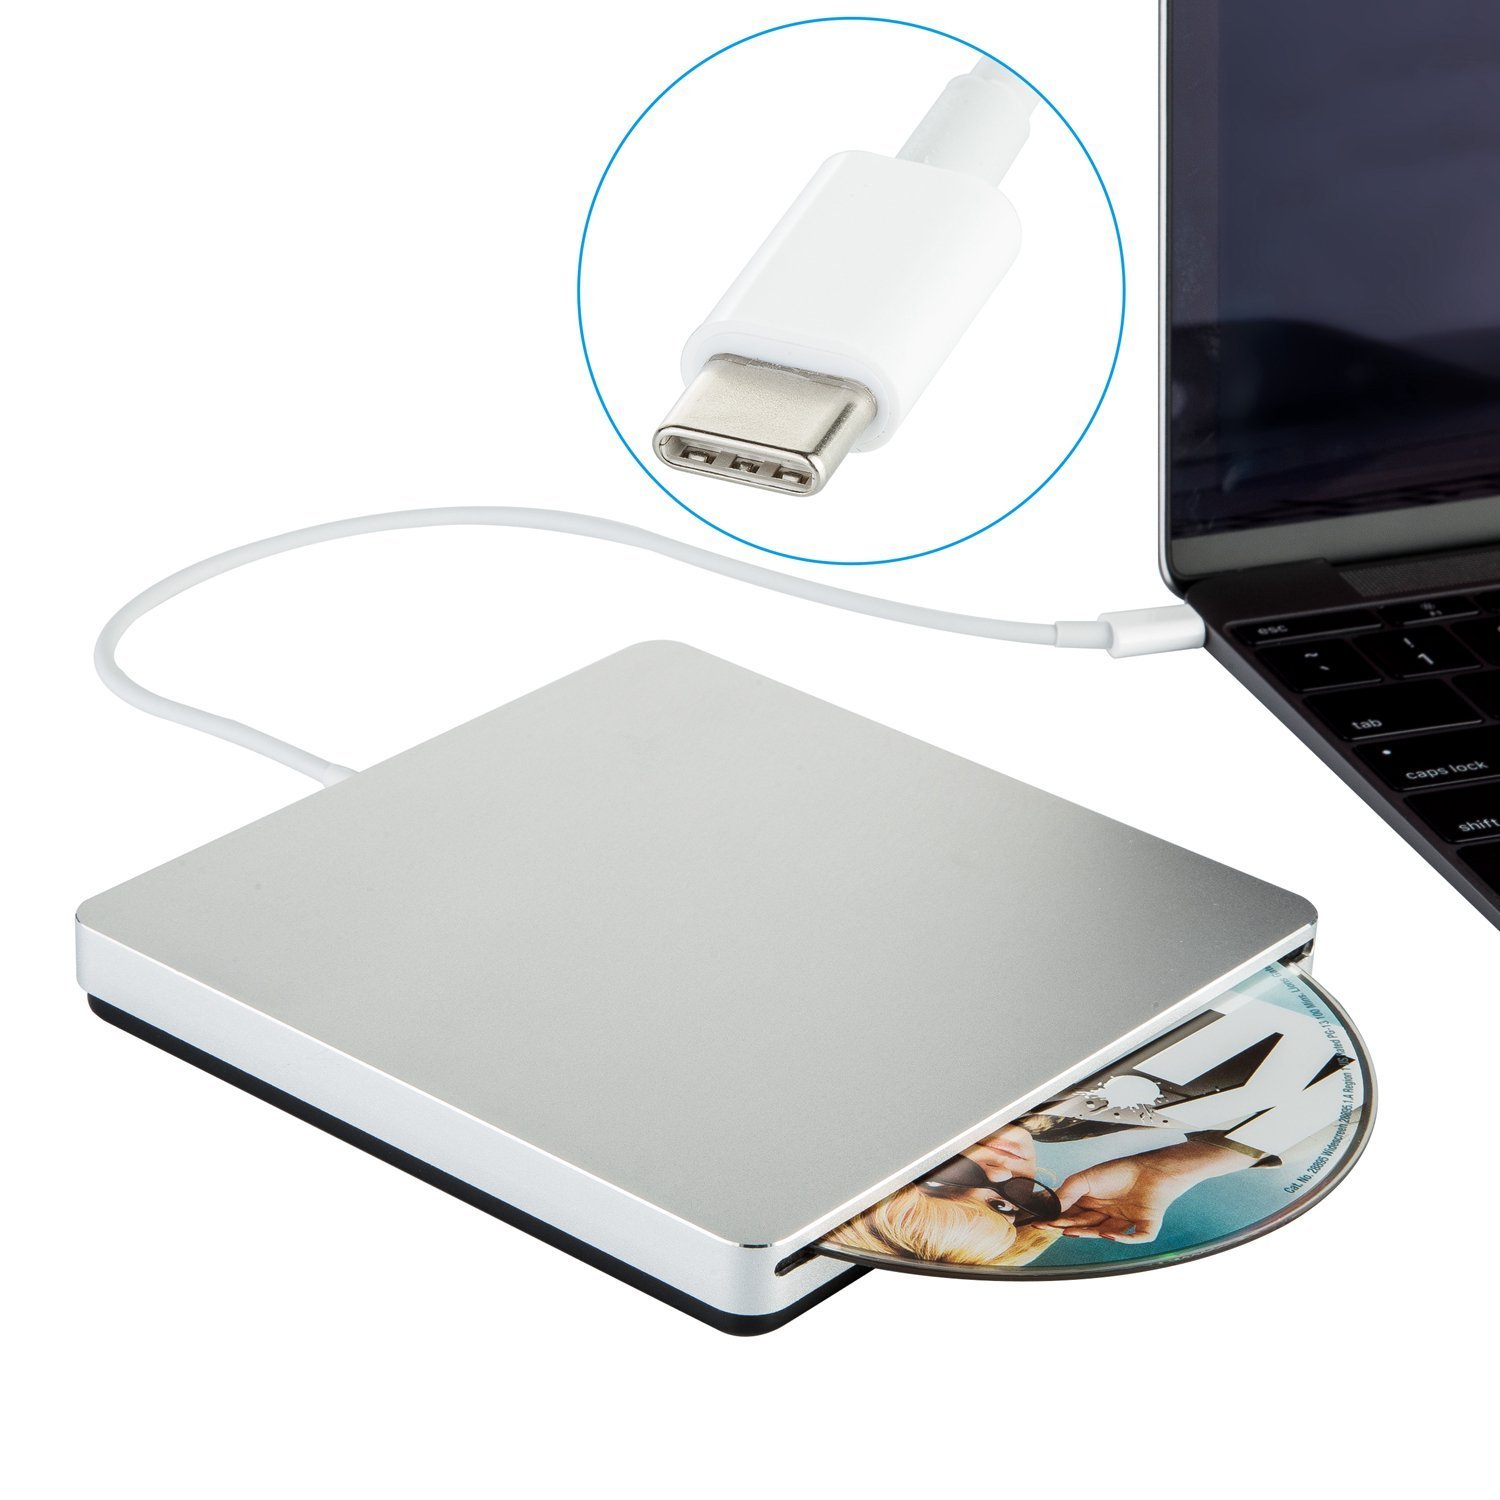 Shop for high-quality drives to create DVDs and CDs